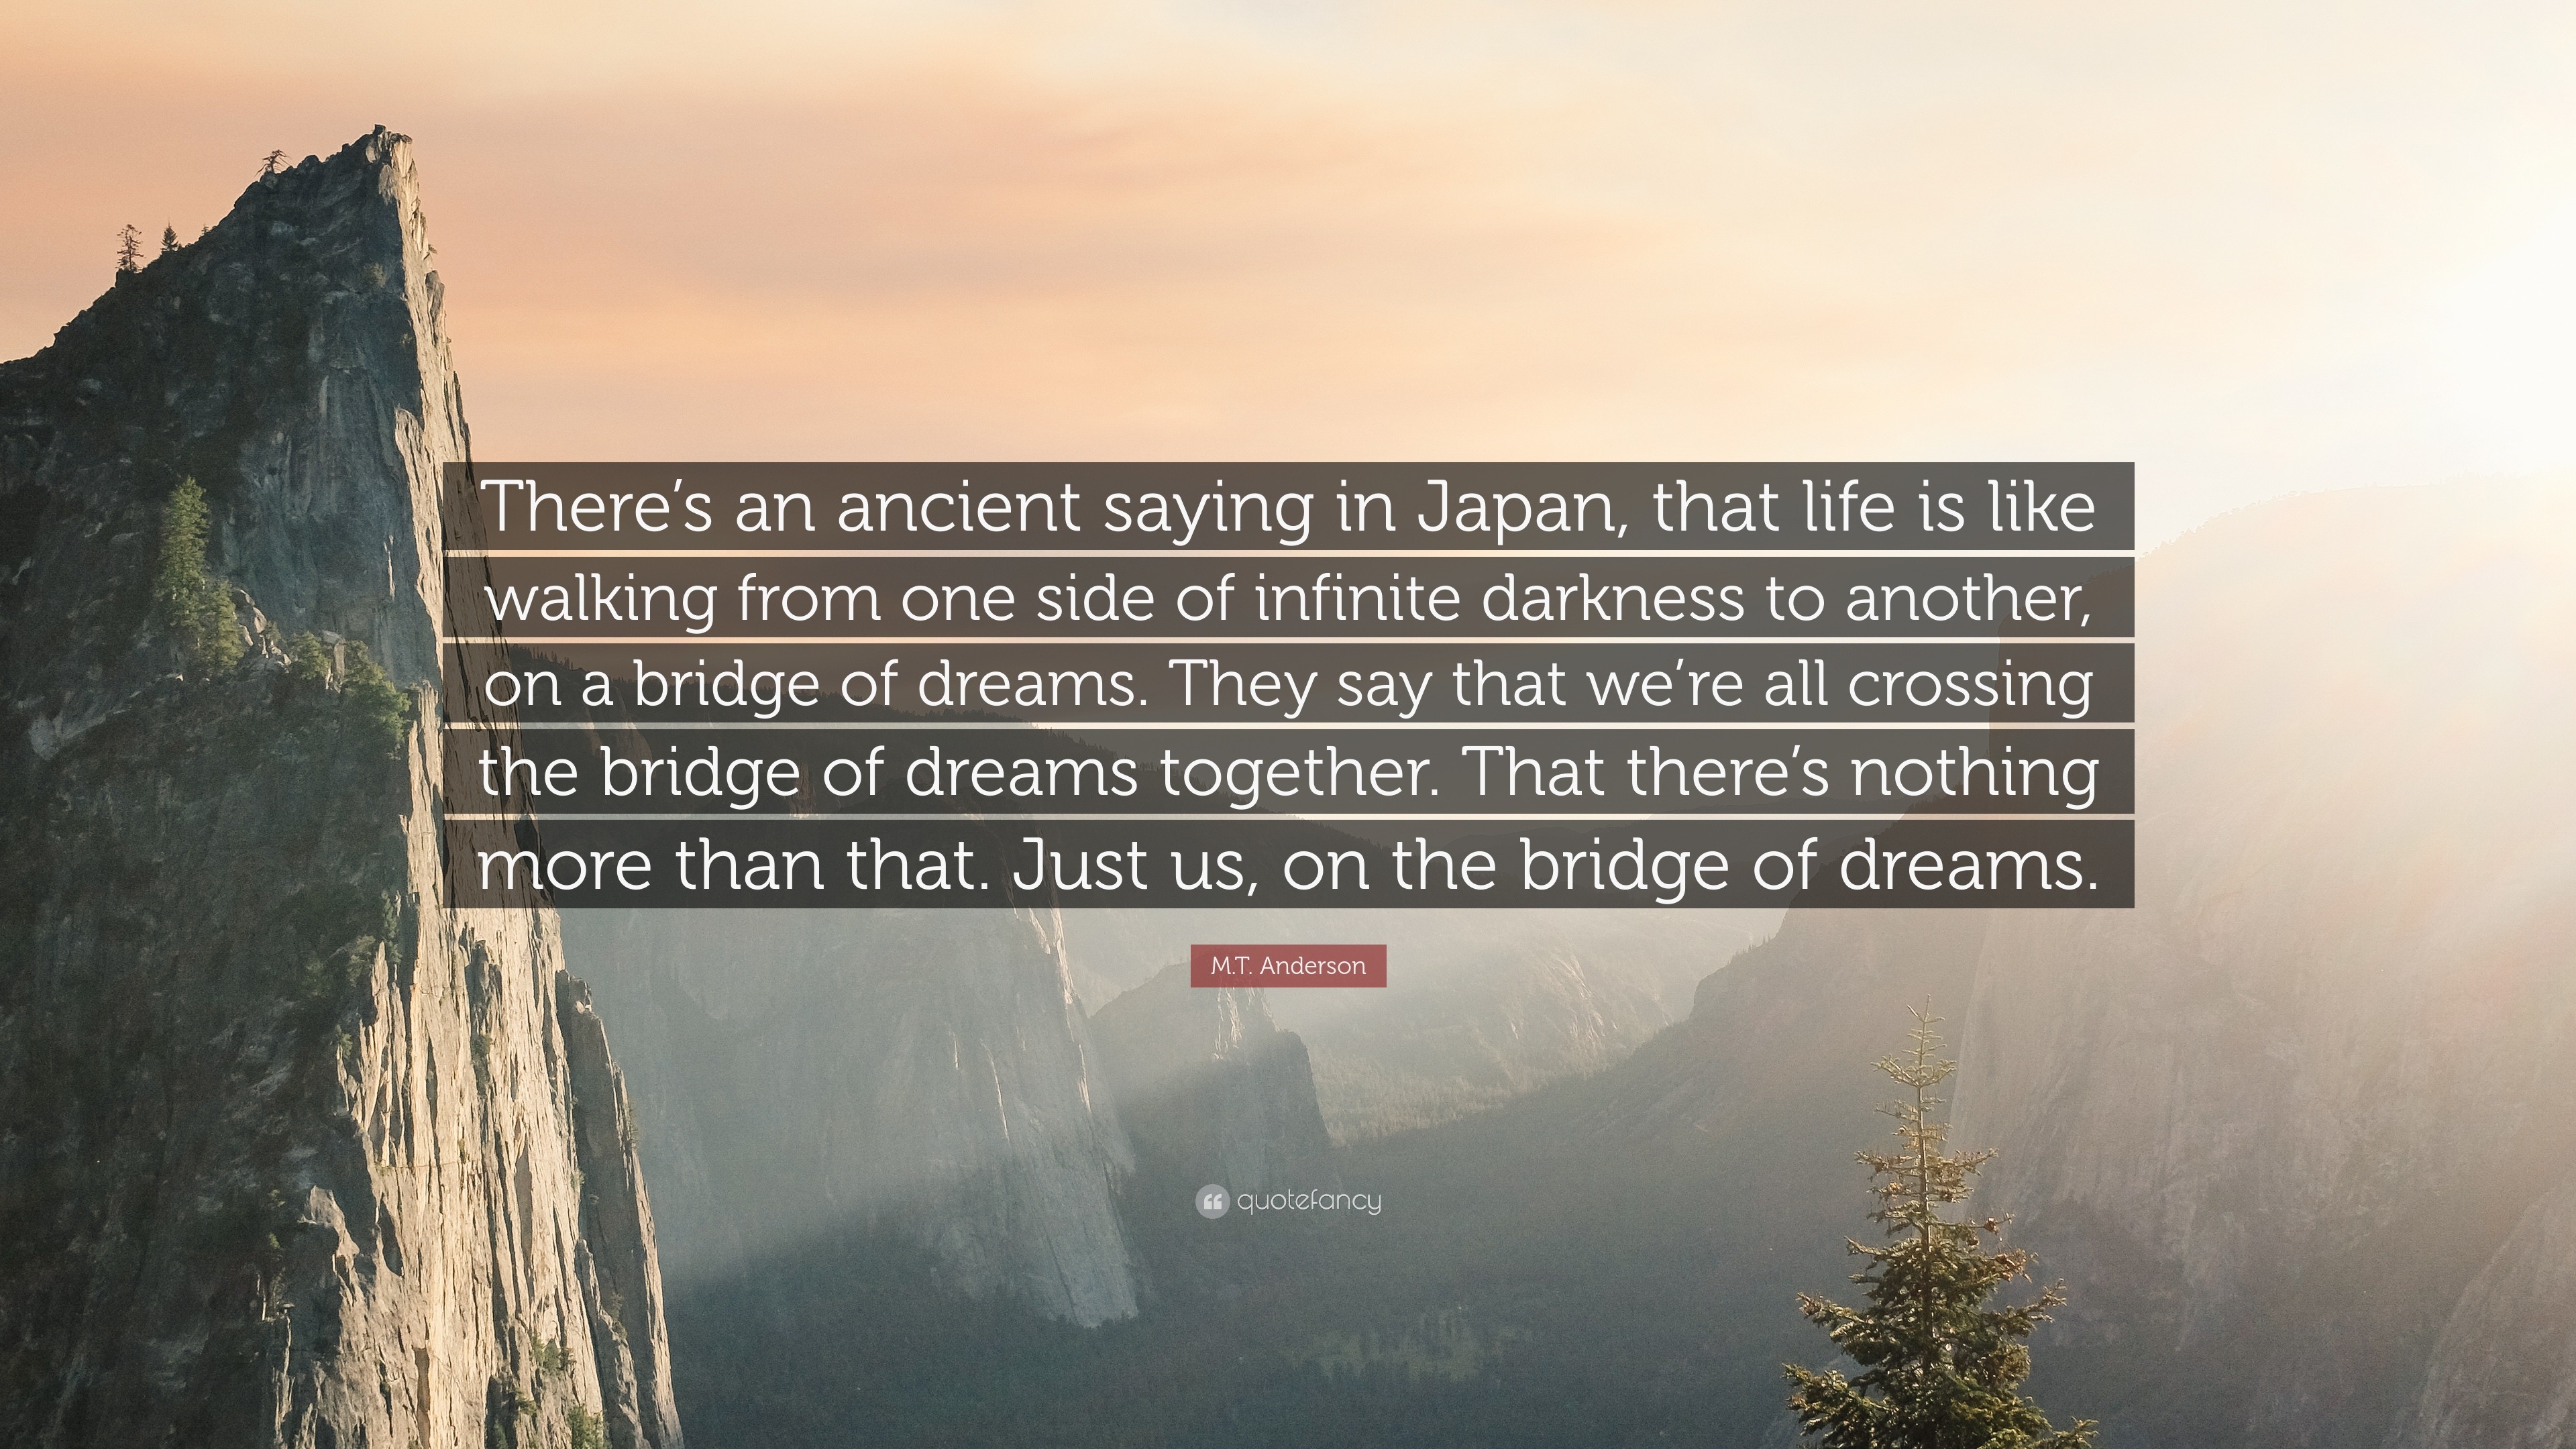 M T Anderson Quote “There s an ancient saying in Japan that life is like